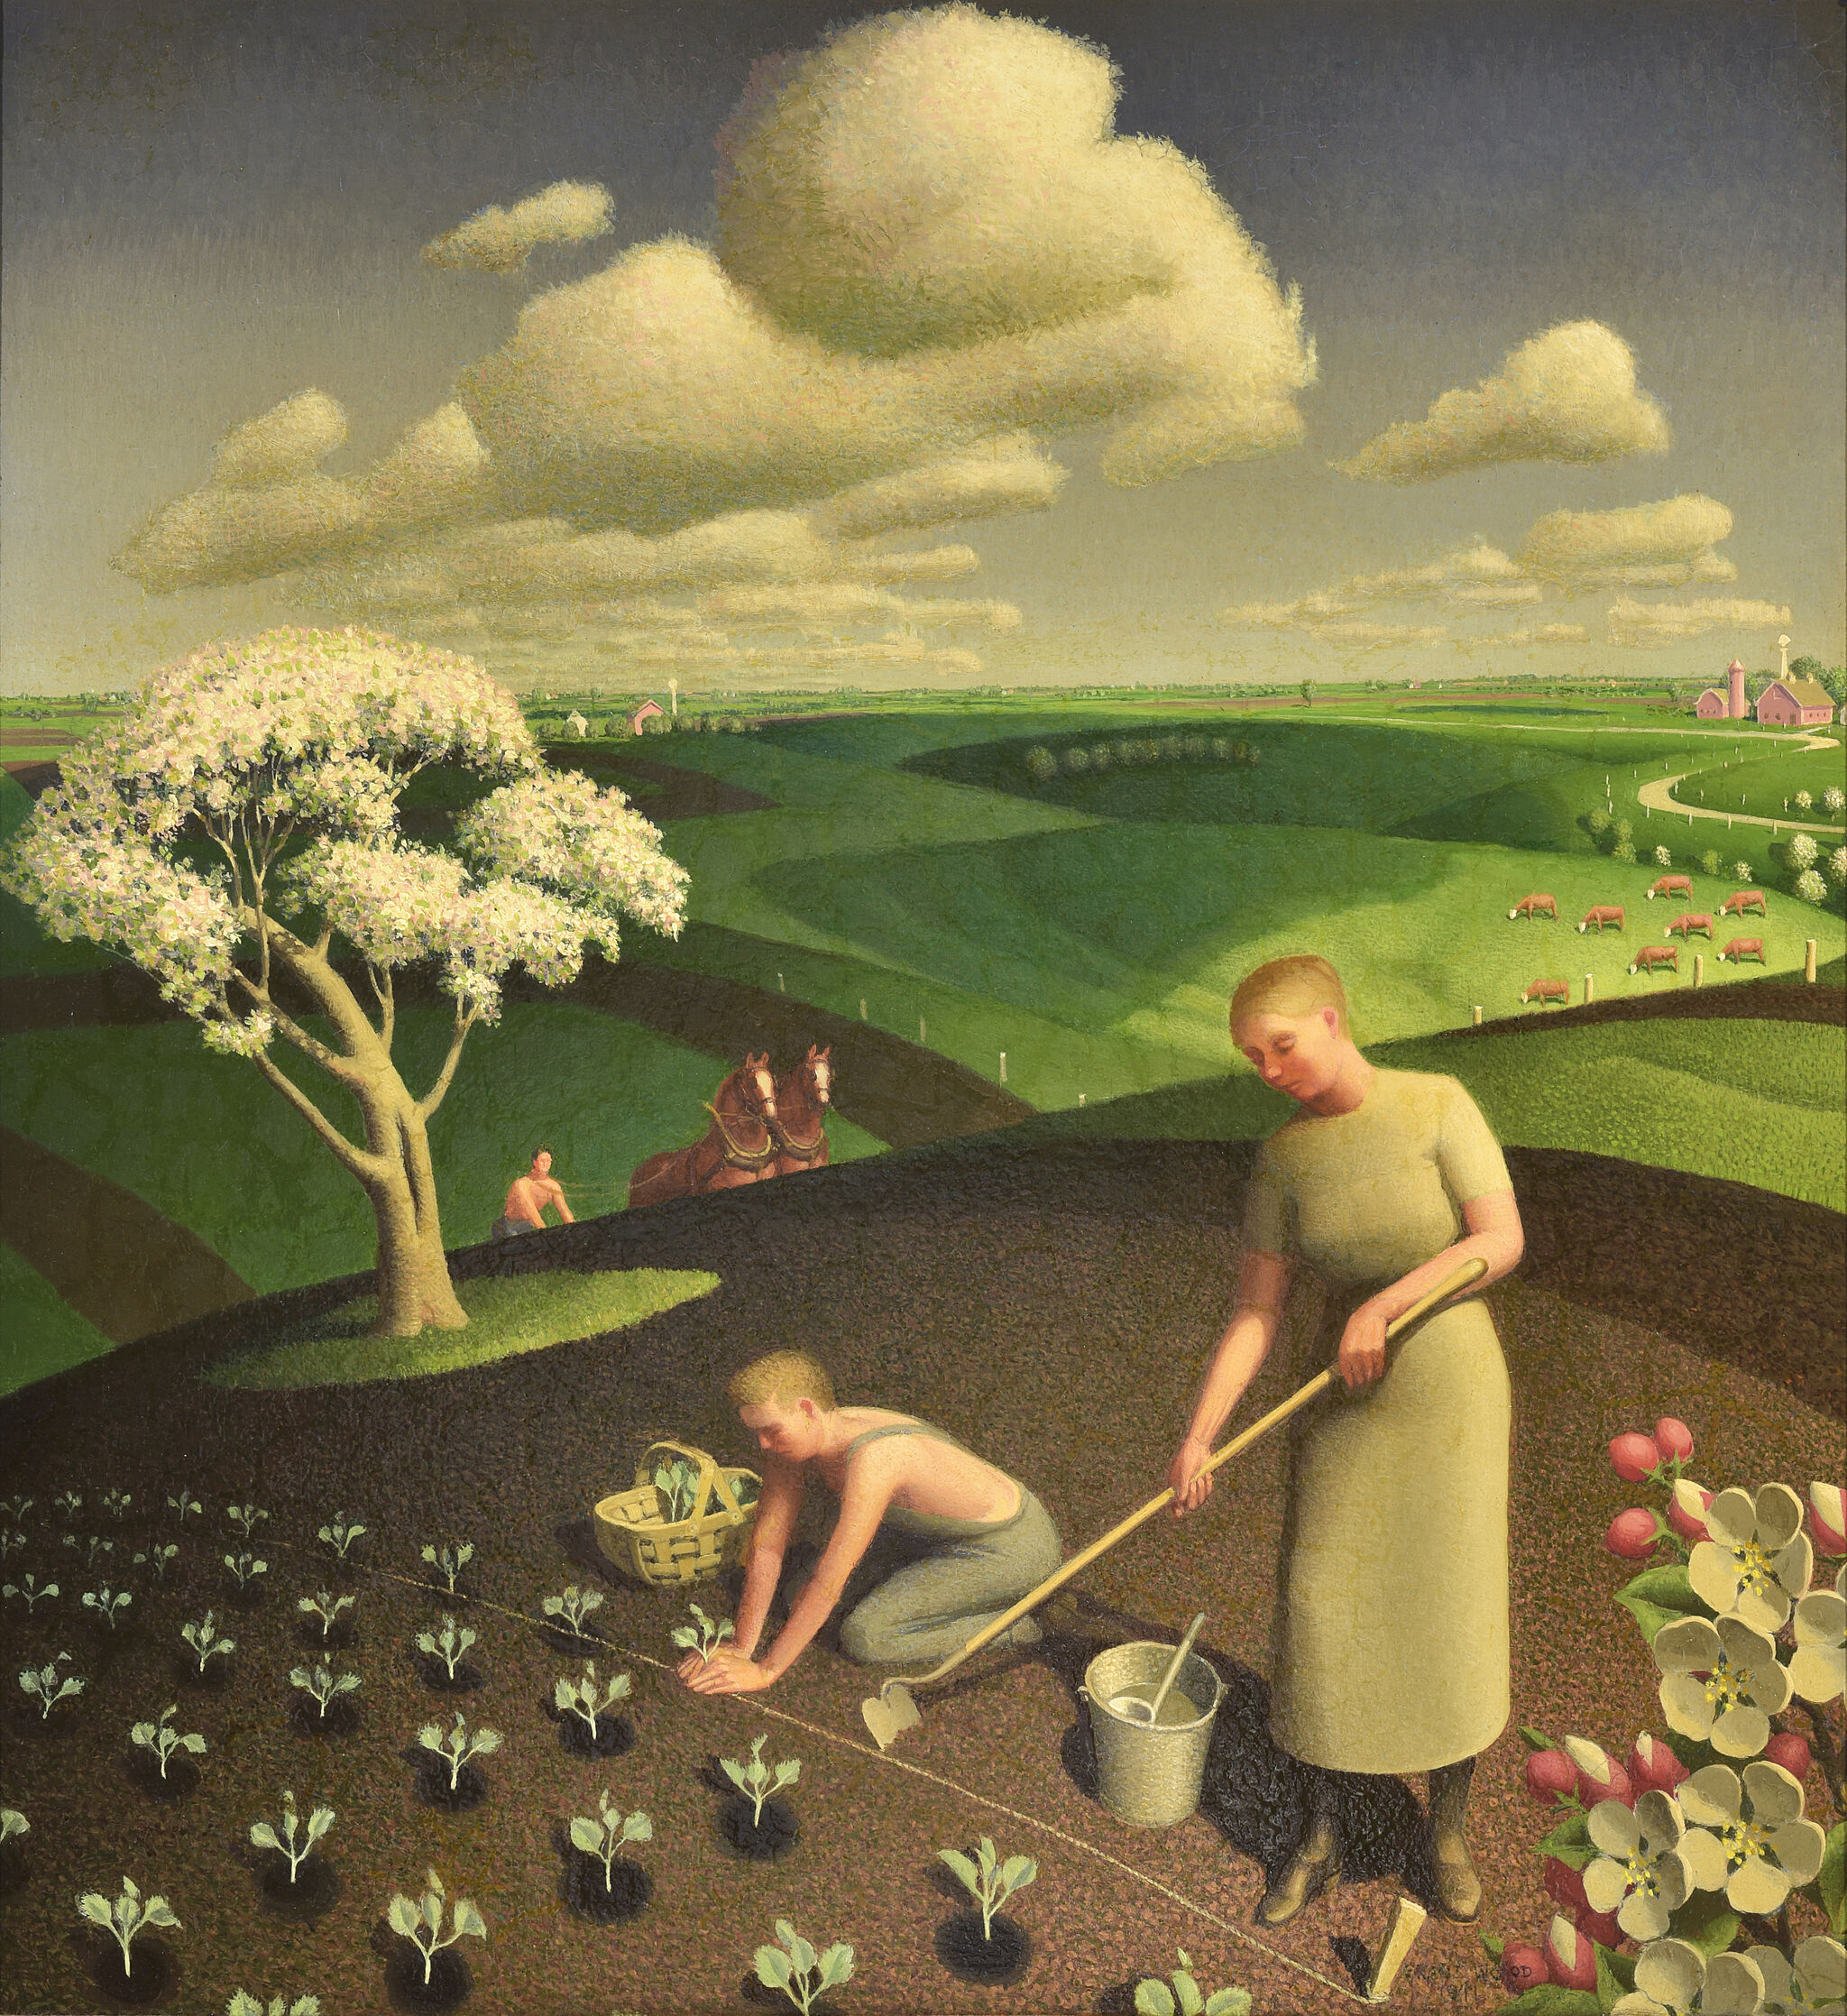 Painting of a country landscape. In the foreground, a woman in child plant crops as a man approaches on a horse and wagon behind them.